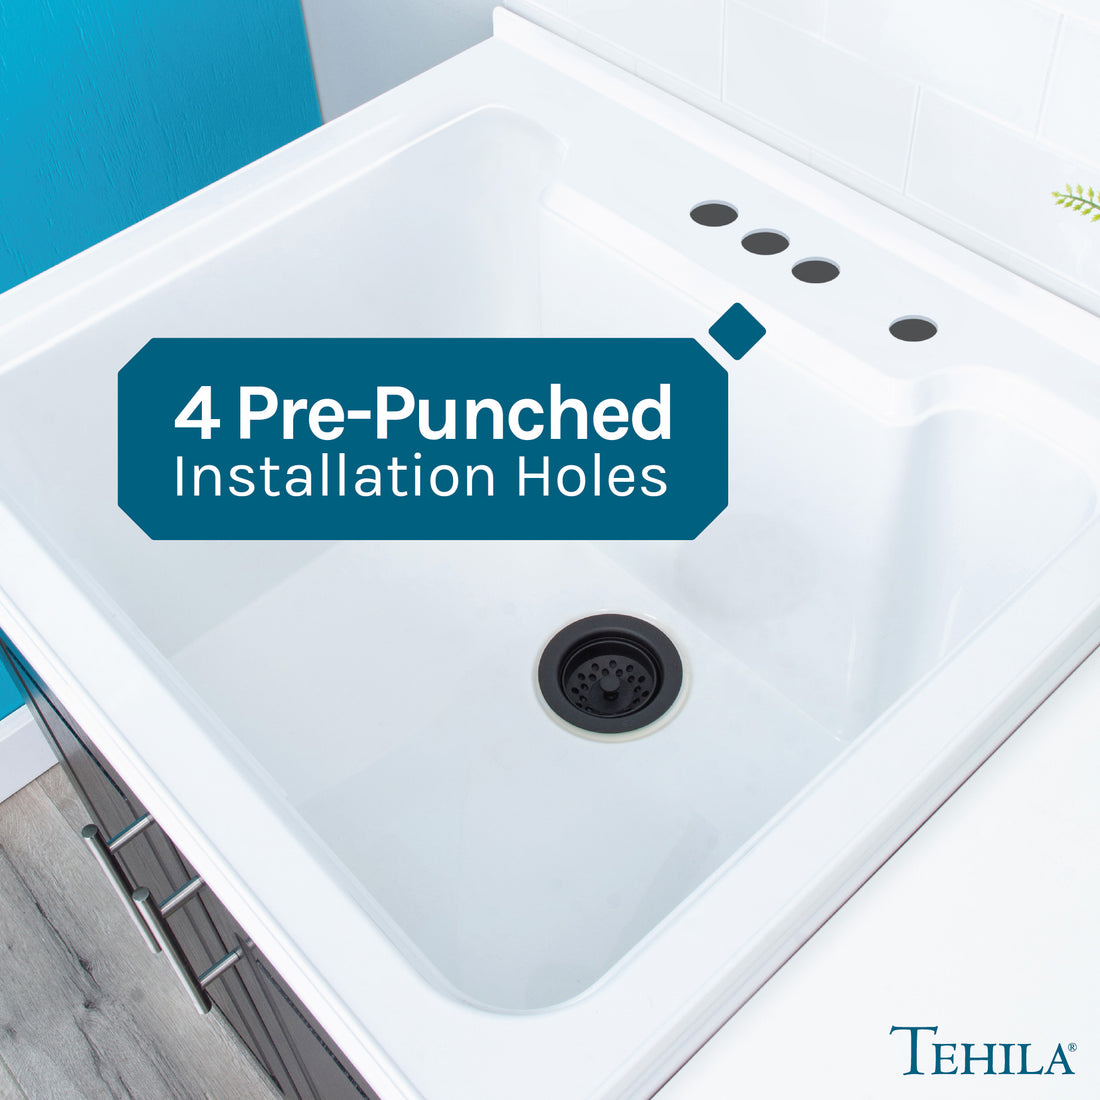 4 Pre-Punched Installation Holes